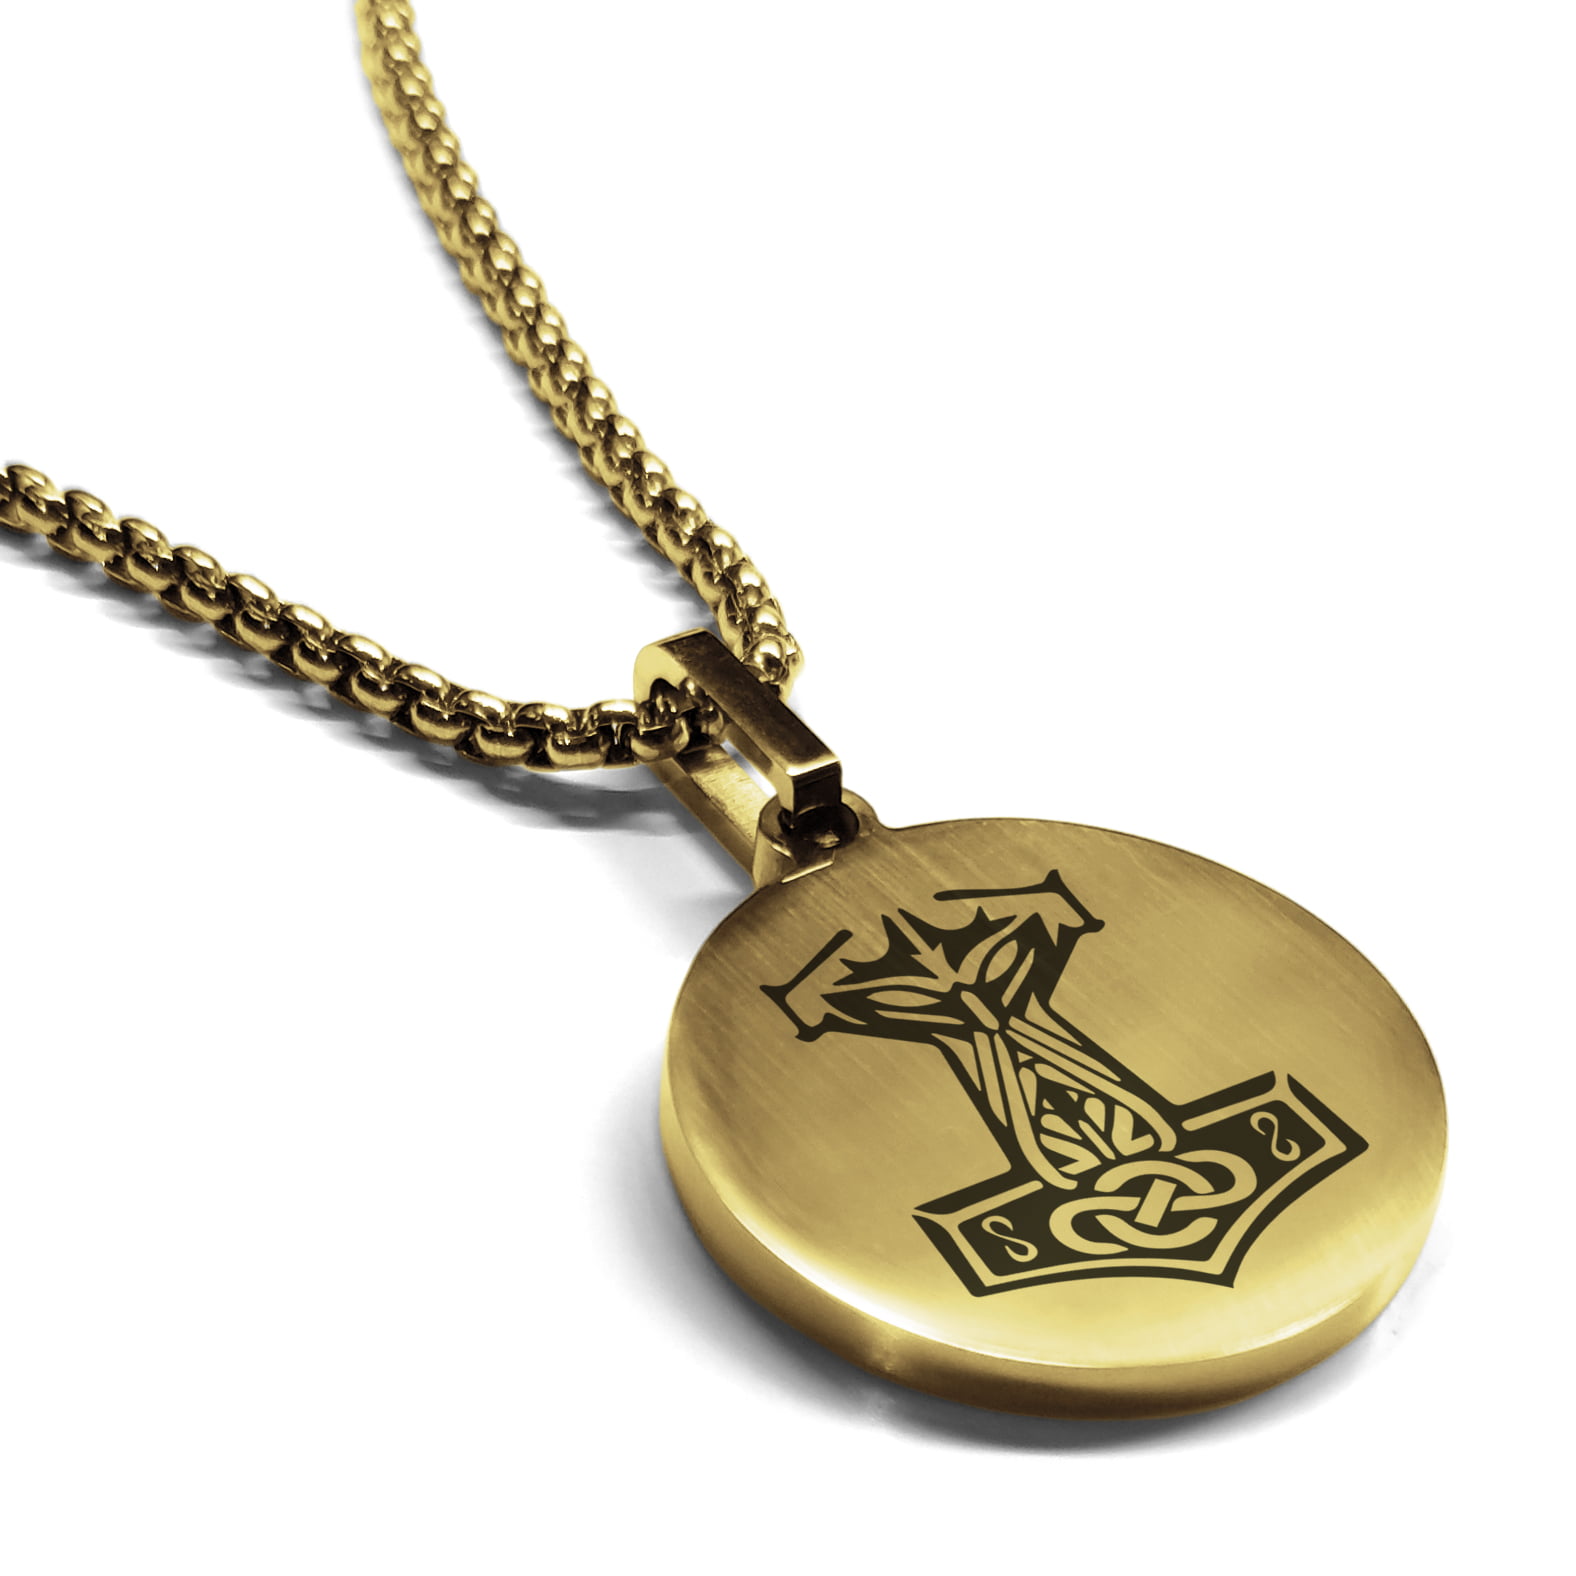 HOT Mens Retro gold hammer Genuine Leather Surfer Chain Necklace Pendant Tools